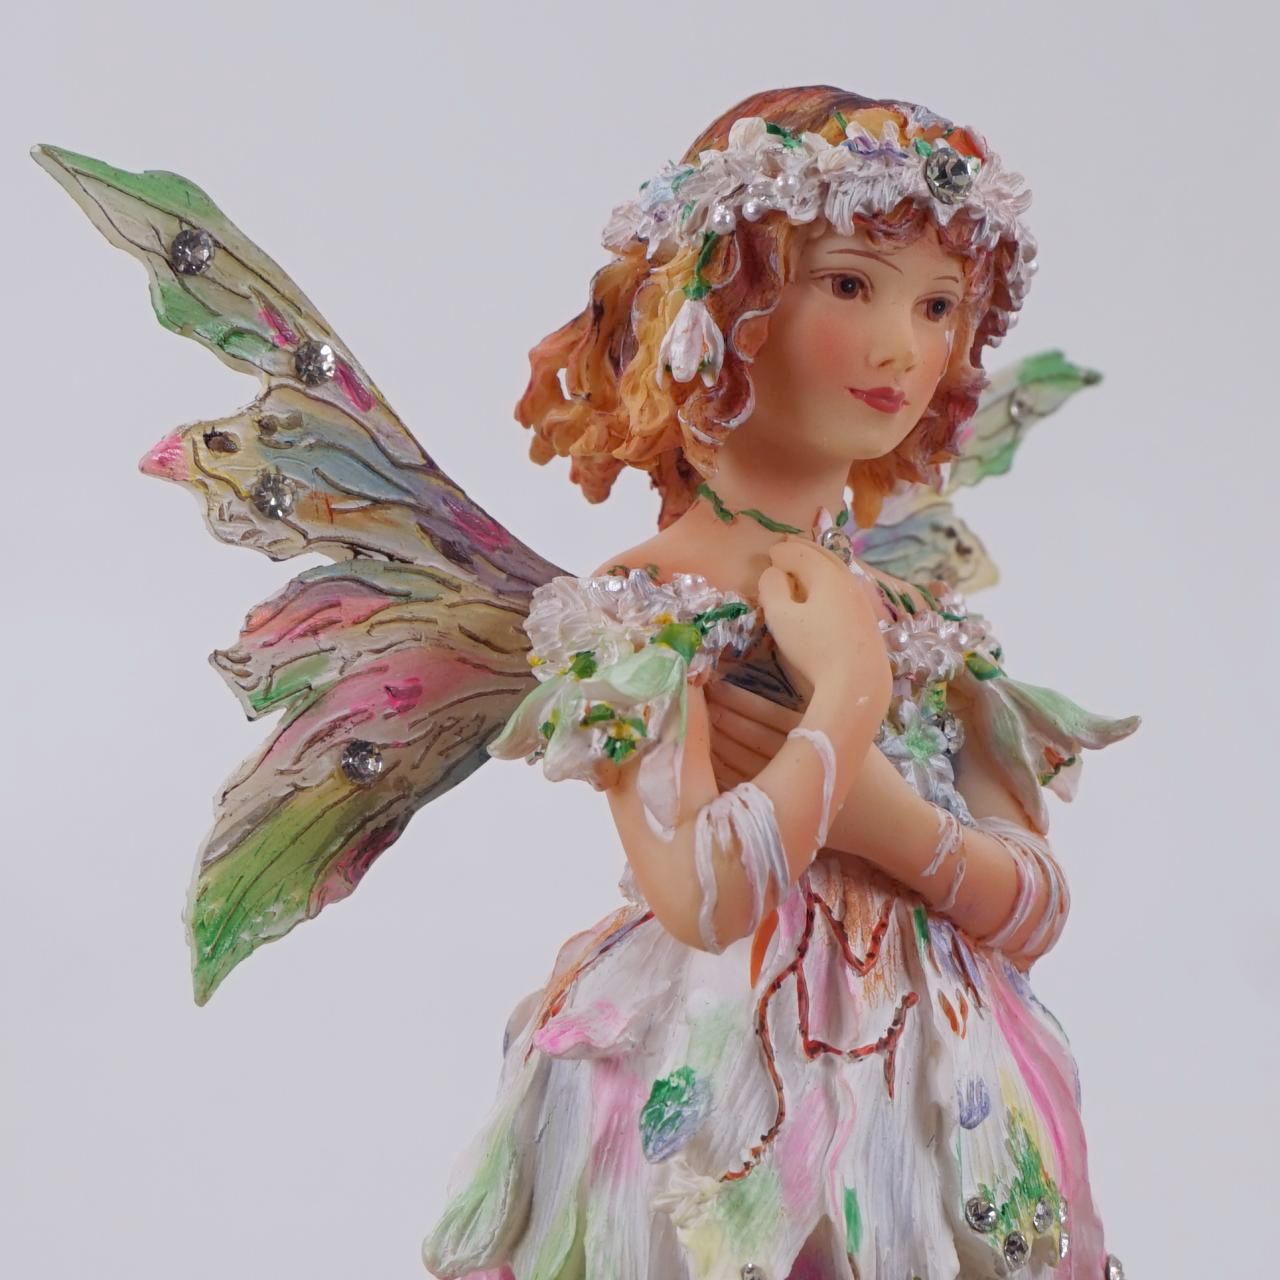 Crisalis Collection★ Early Snowdrop Faerie (1-869) 10% OFF